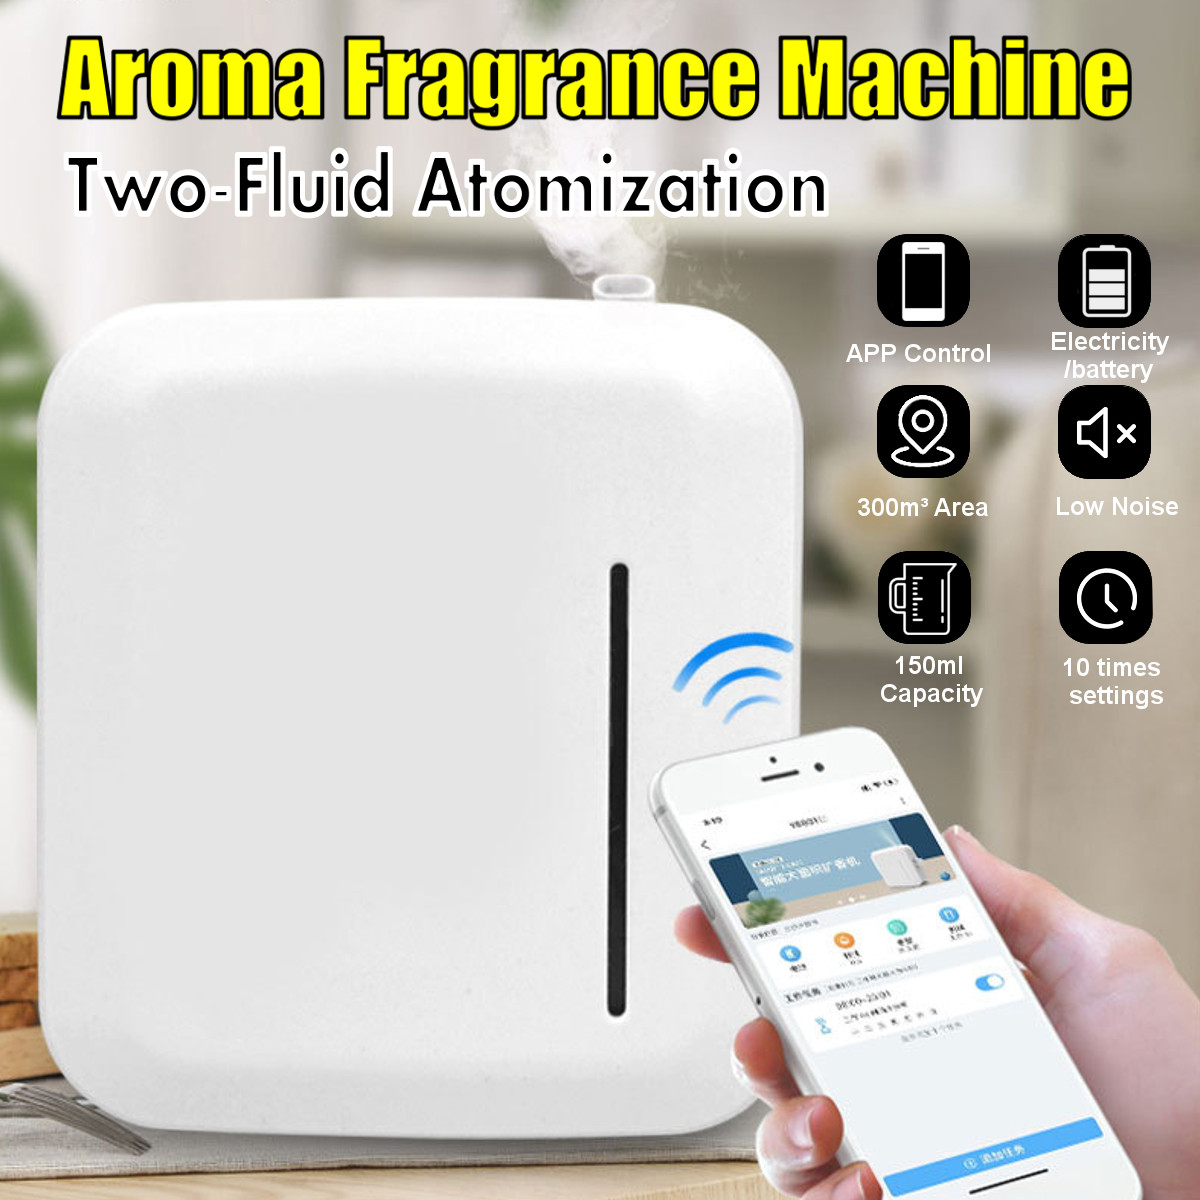 Remote-Control-Intelligent-Aroma-Fragrance-Machine-Low-Noise-Long-Battery-Life-Bluetooth-Aroma-Difus-1950383-1